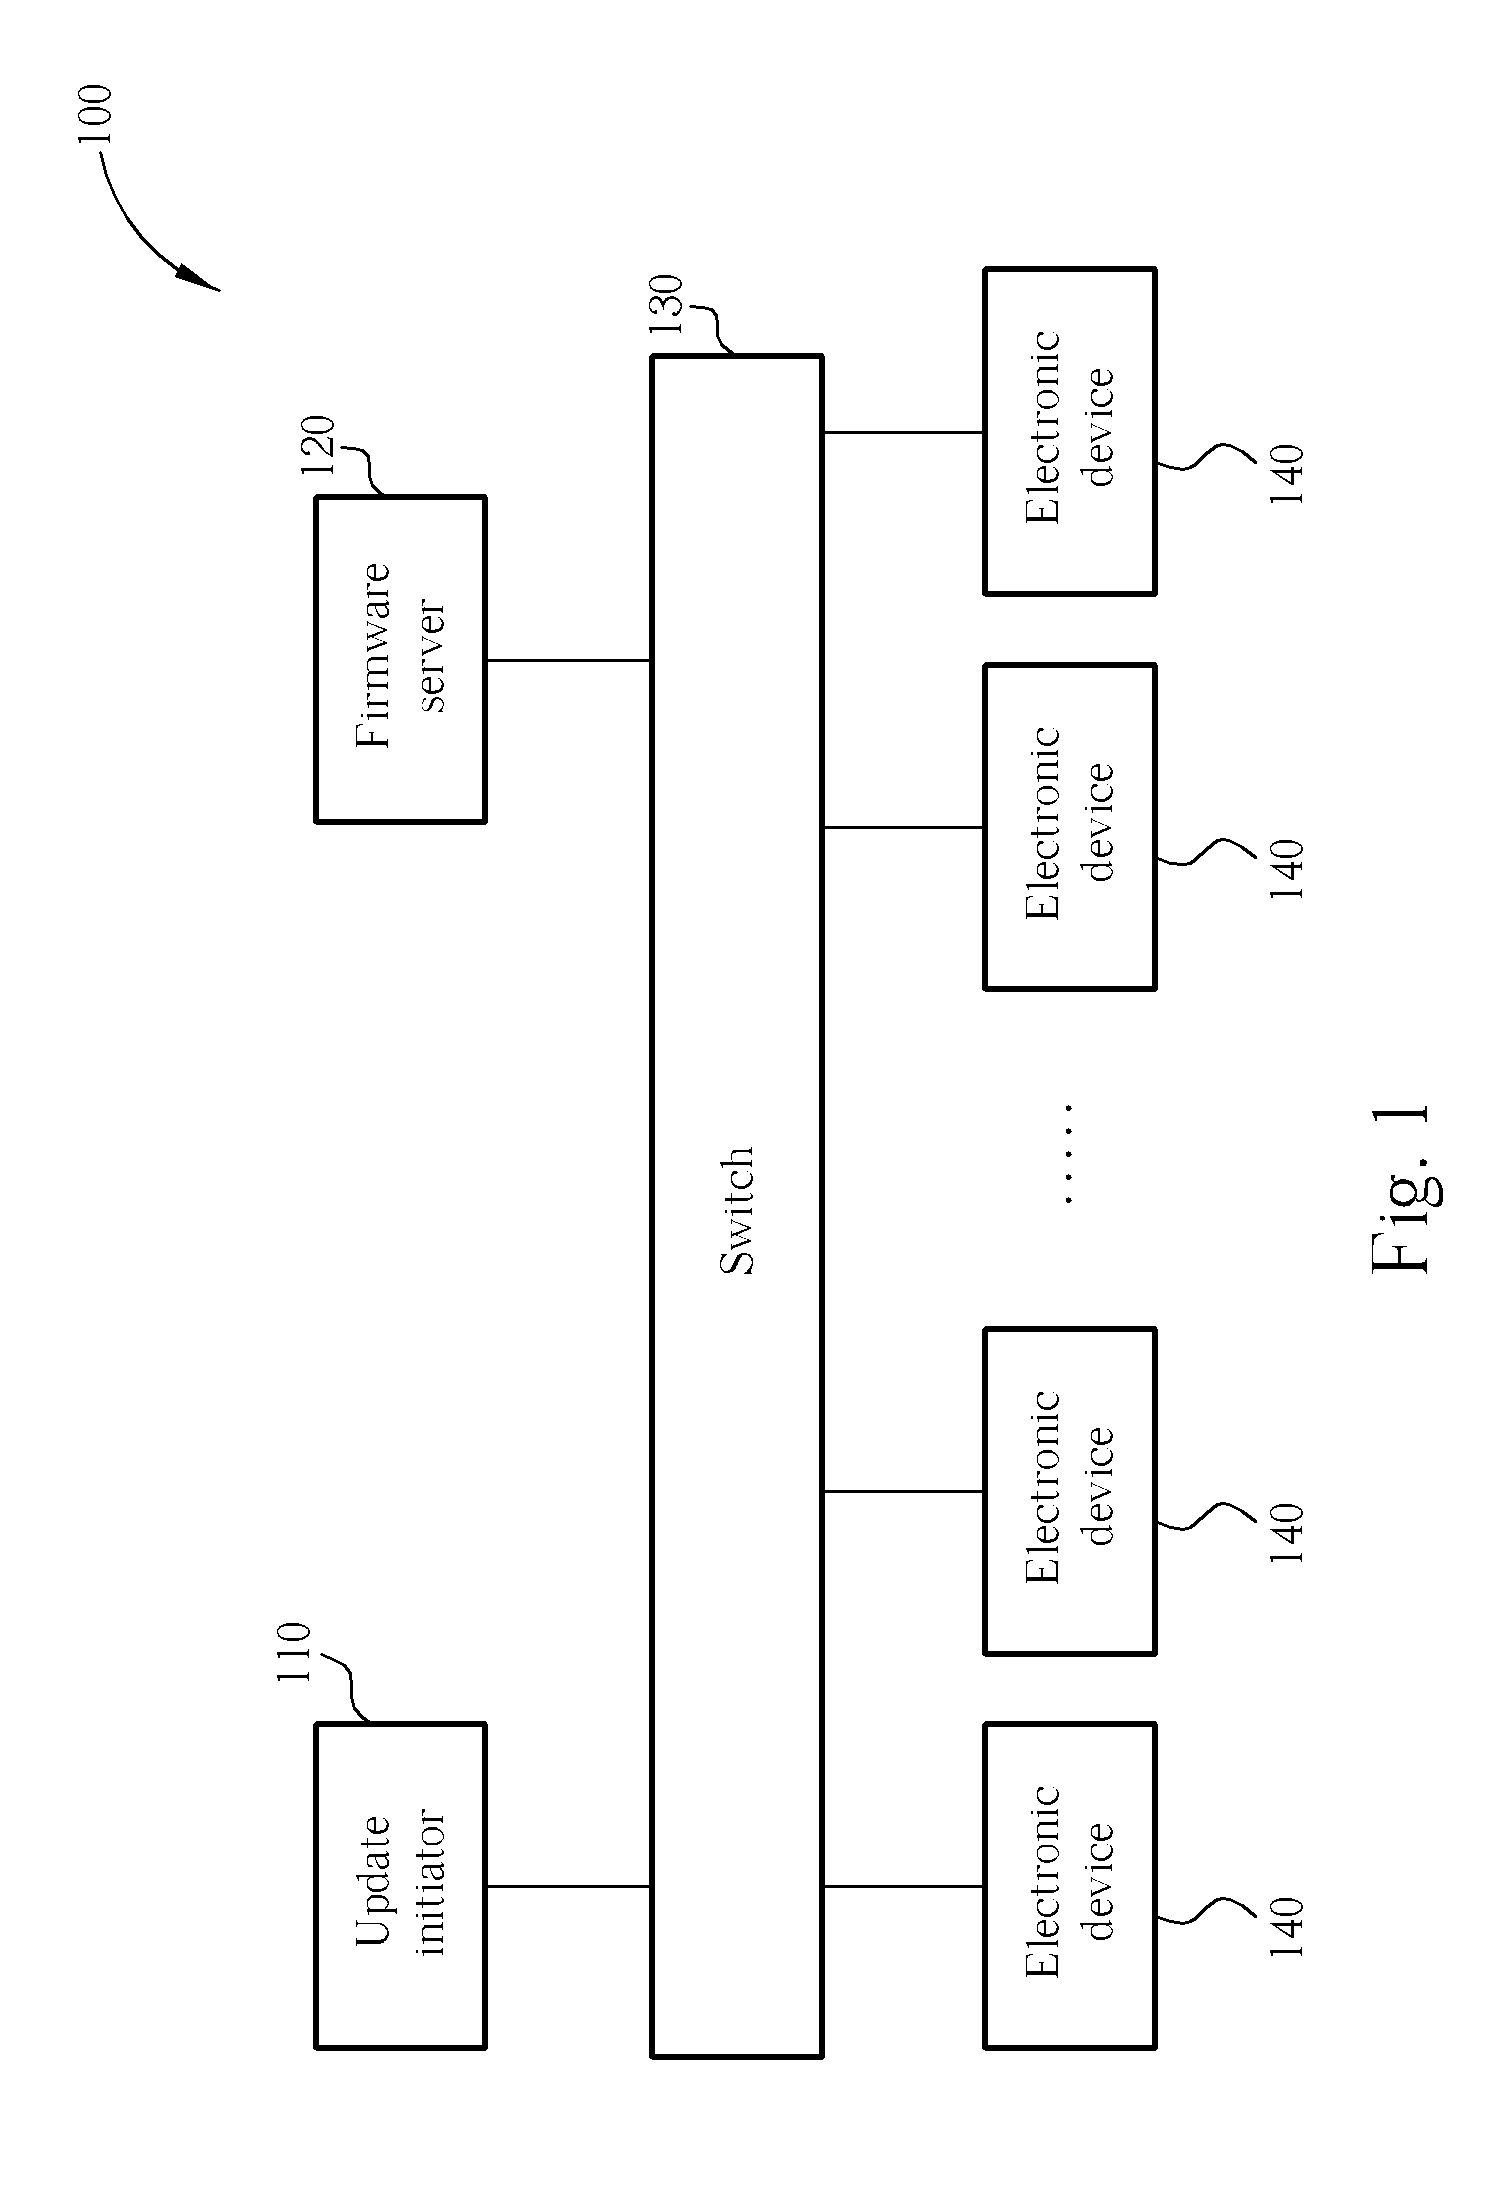 Firmware update method for automatically updating firmware of a plurality of electronic devices and network thereof